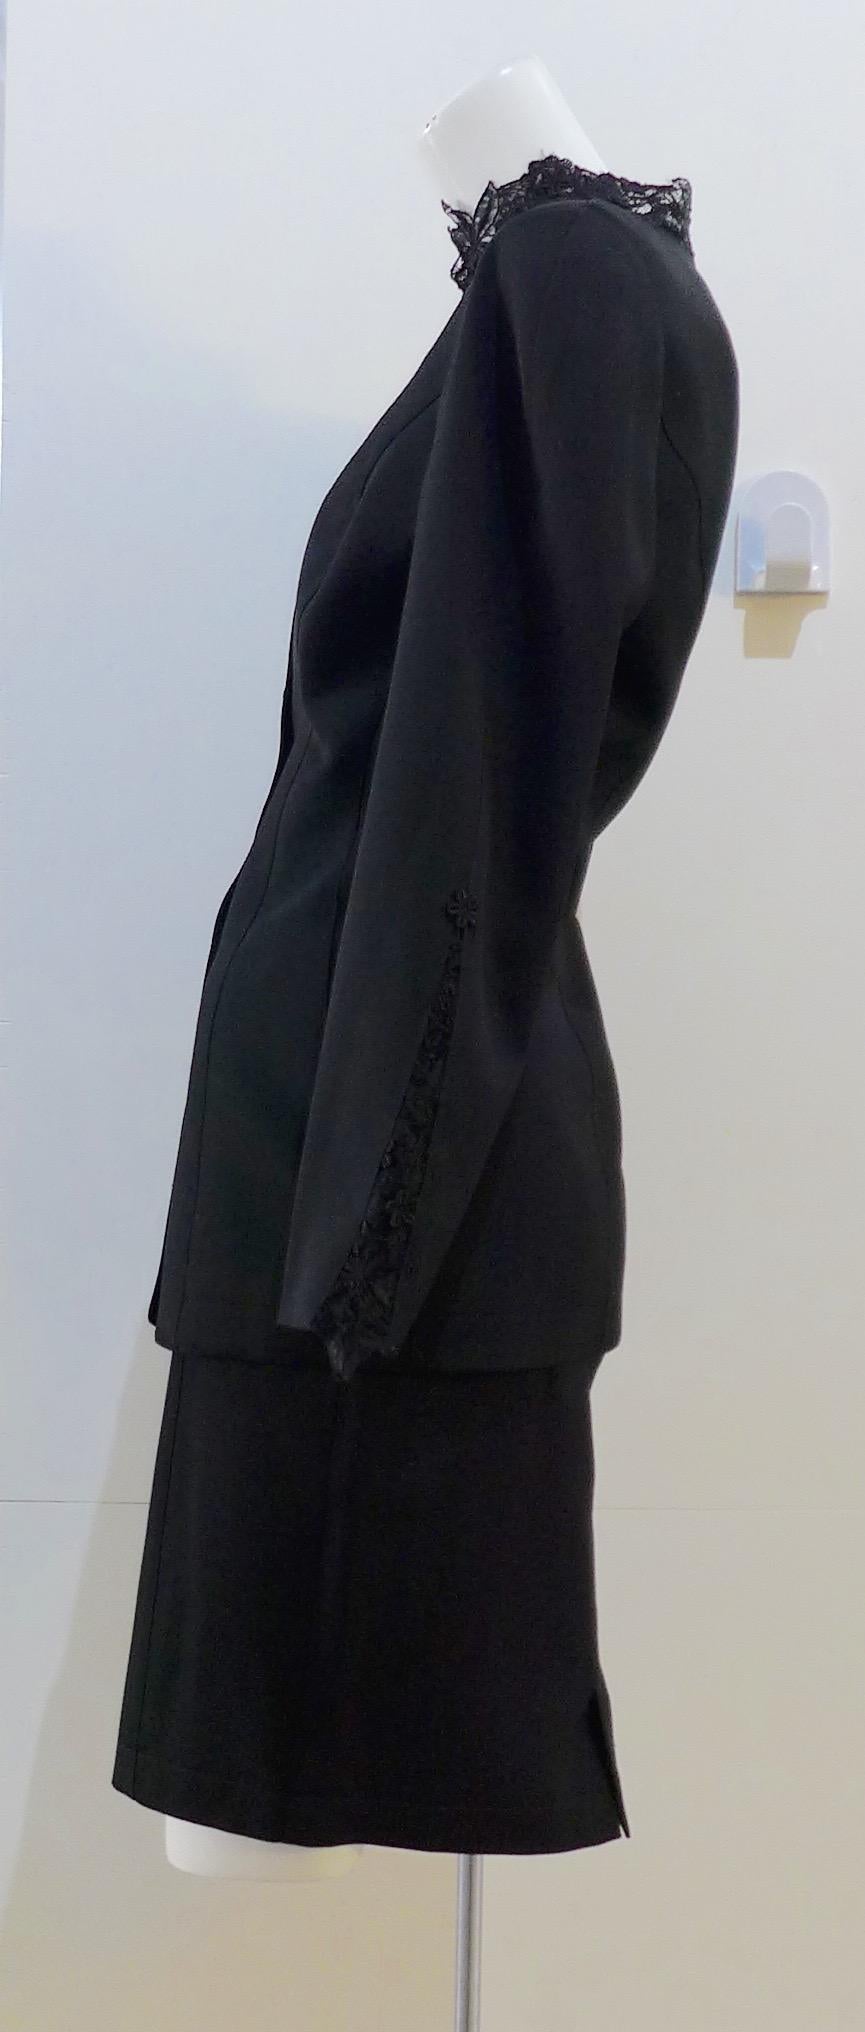 THIERRY MUGLER Black Skirt Suit With Lace Details Size 40 In Good Condition For Sale In Los Angeles, CA